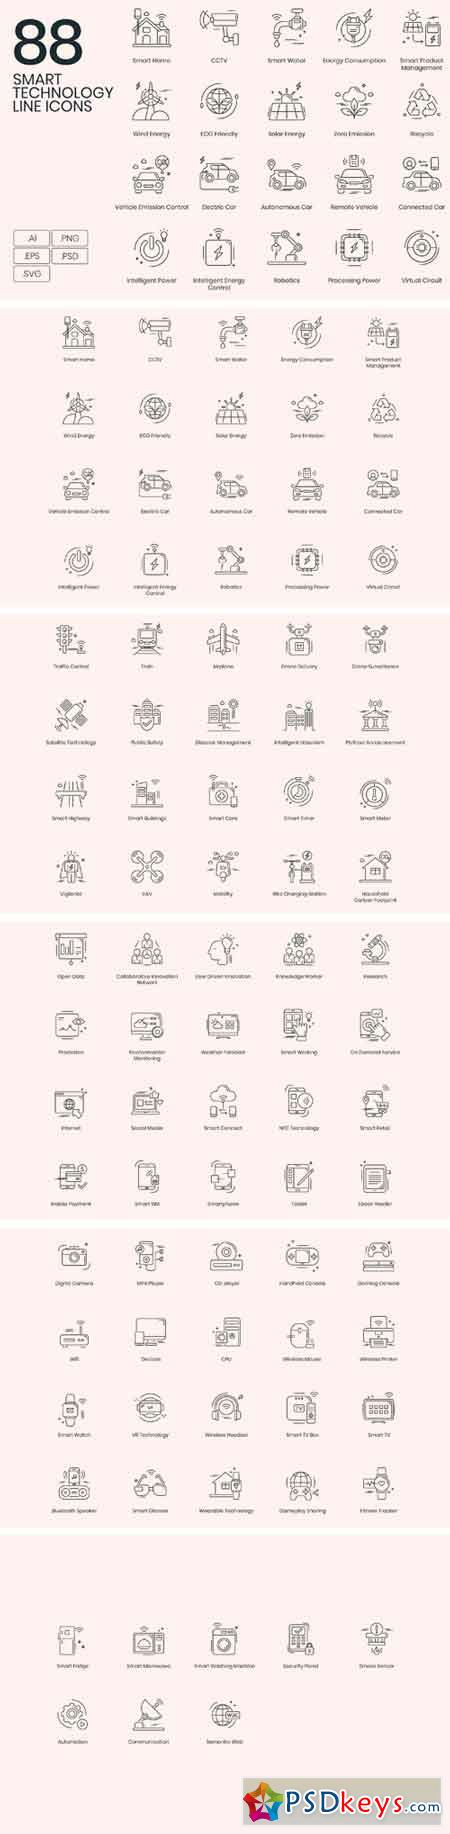 88 Smart Technology Line Icons 2269637